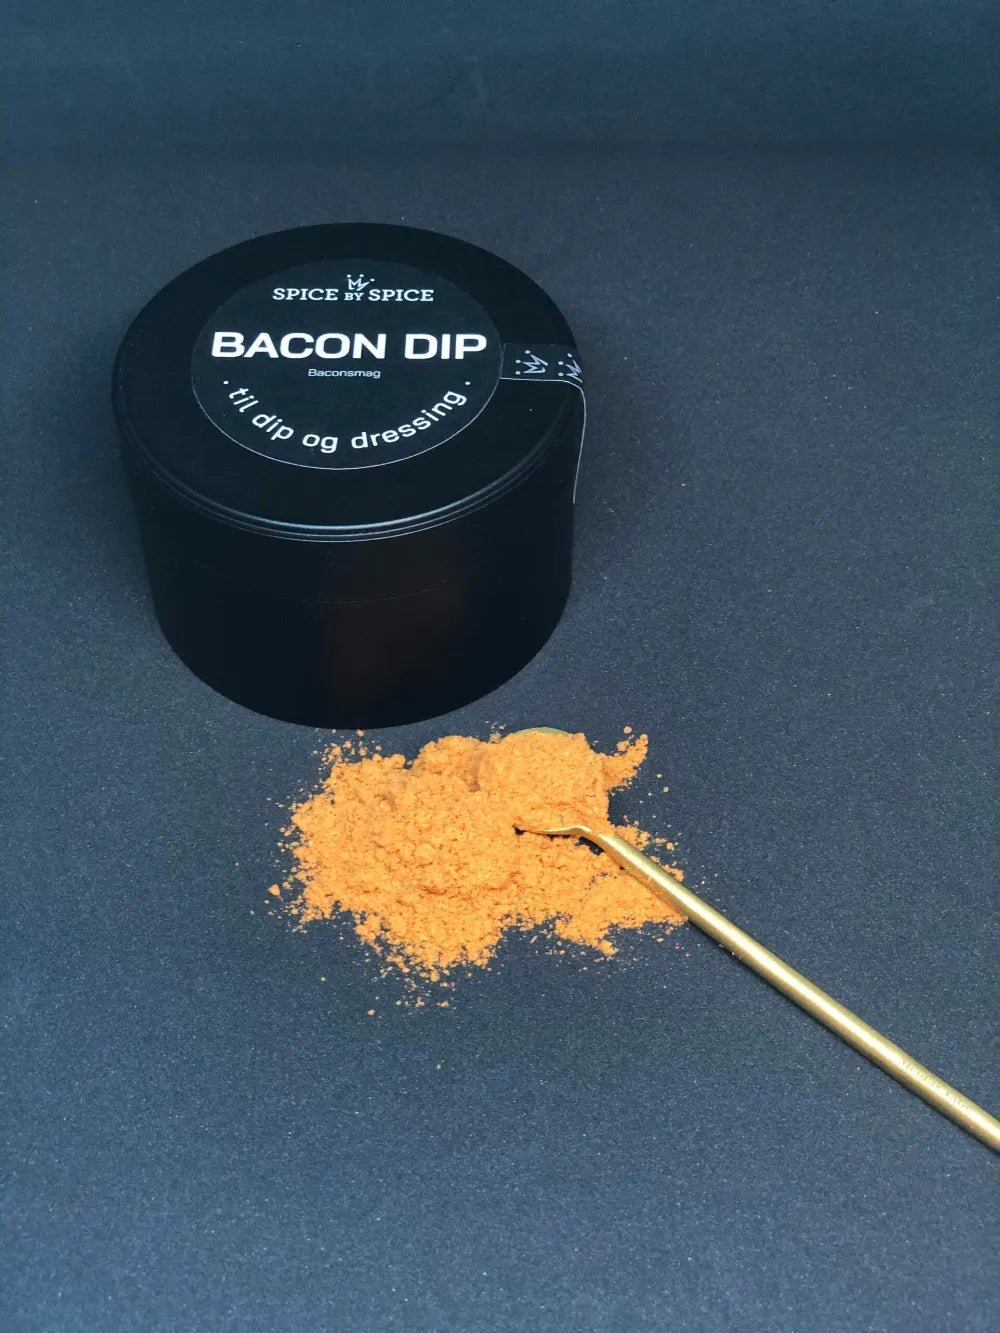 Spice by Spice, Bacon DIP - Spice mix, Dip